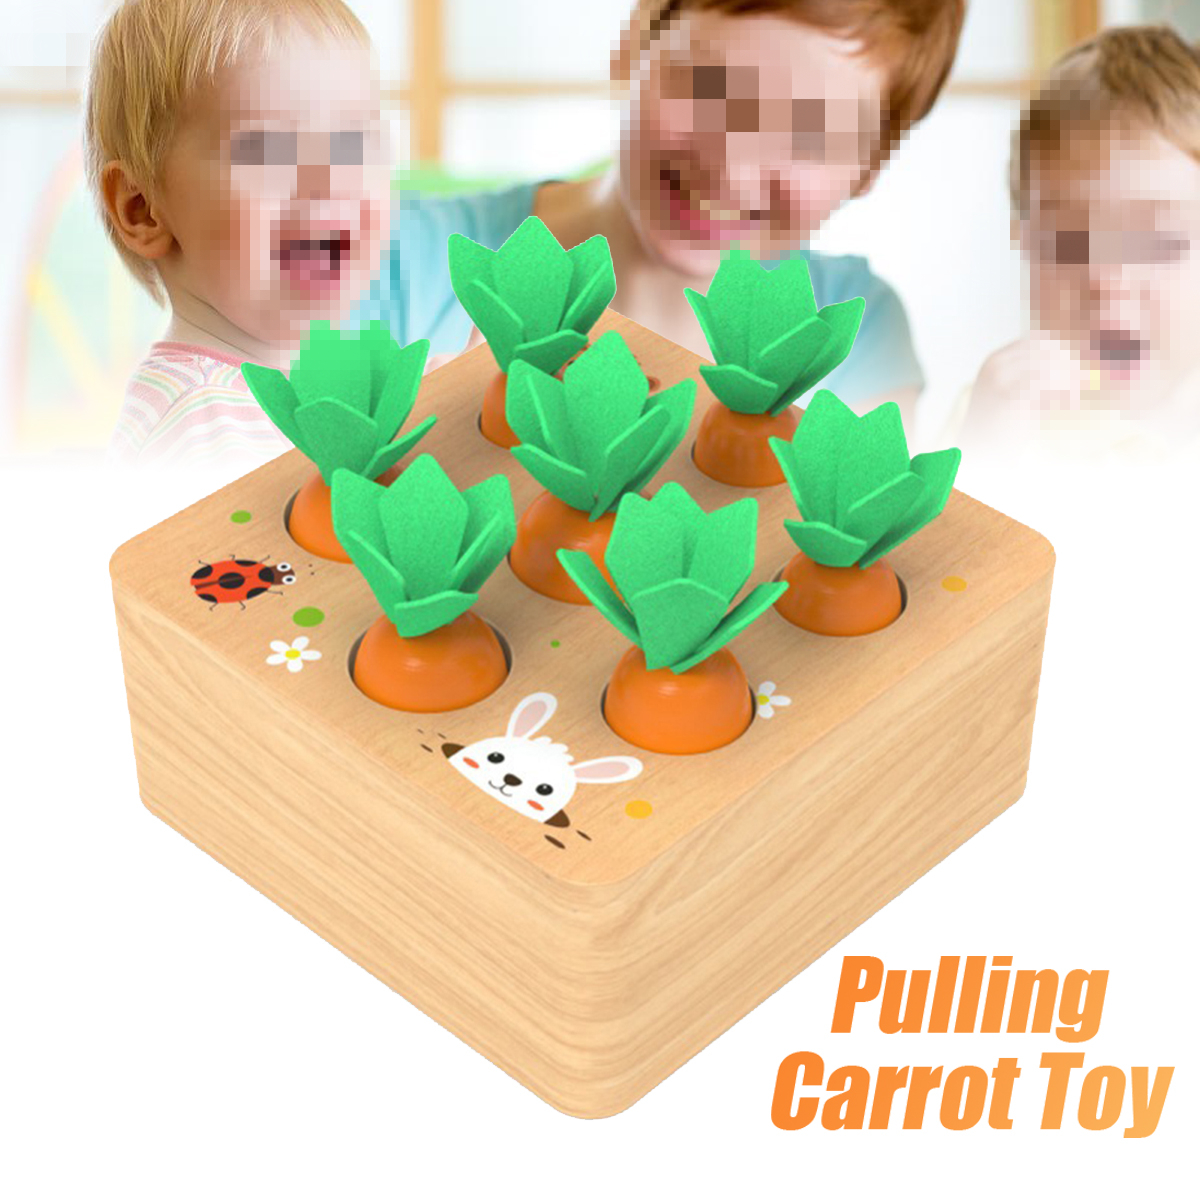 Kids-Wooden-Building-Blocks-Pulling-Carrot-Game-Children-Early-Educational-Toys-1676982-1